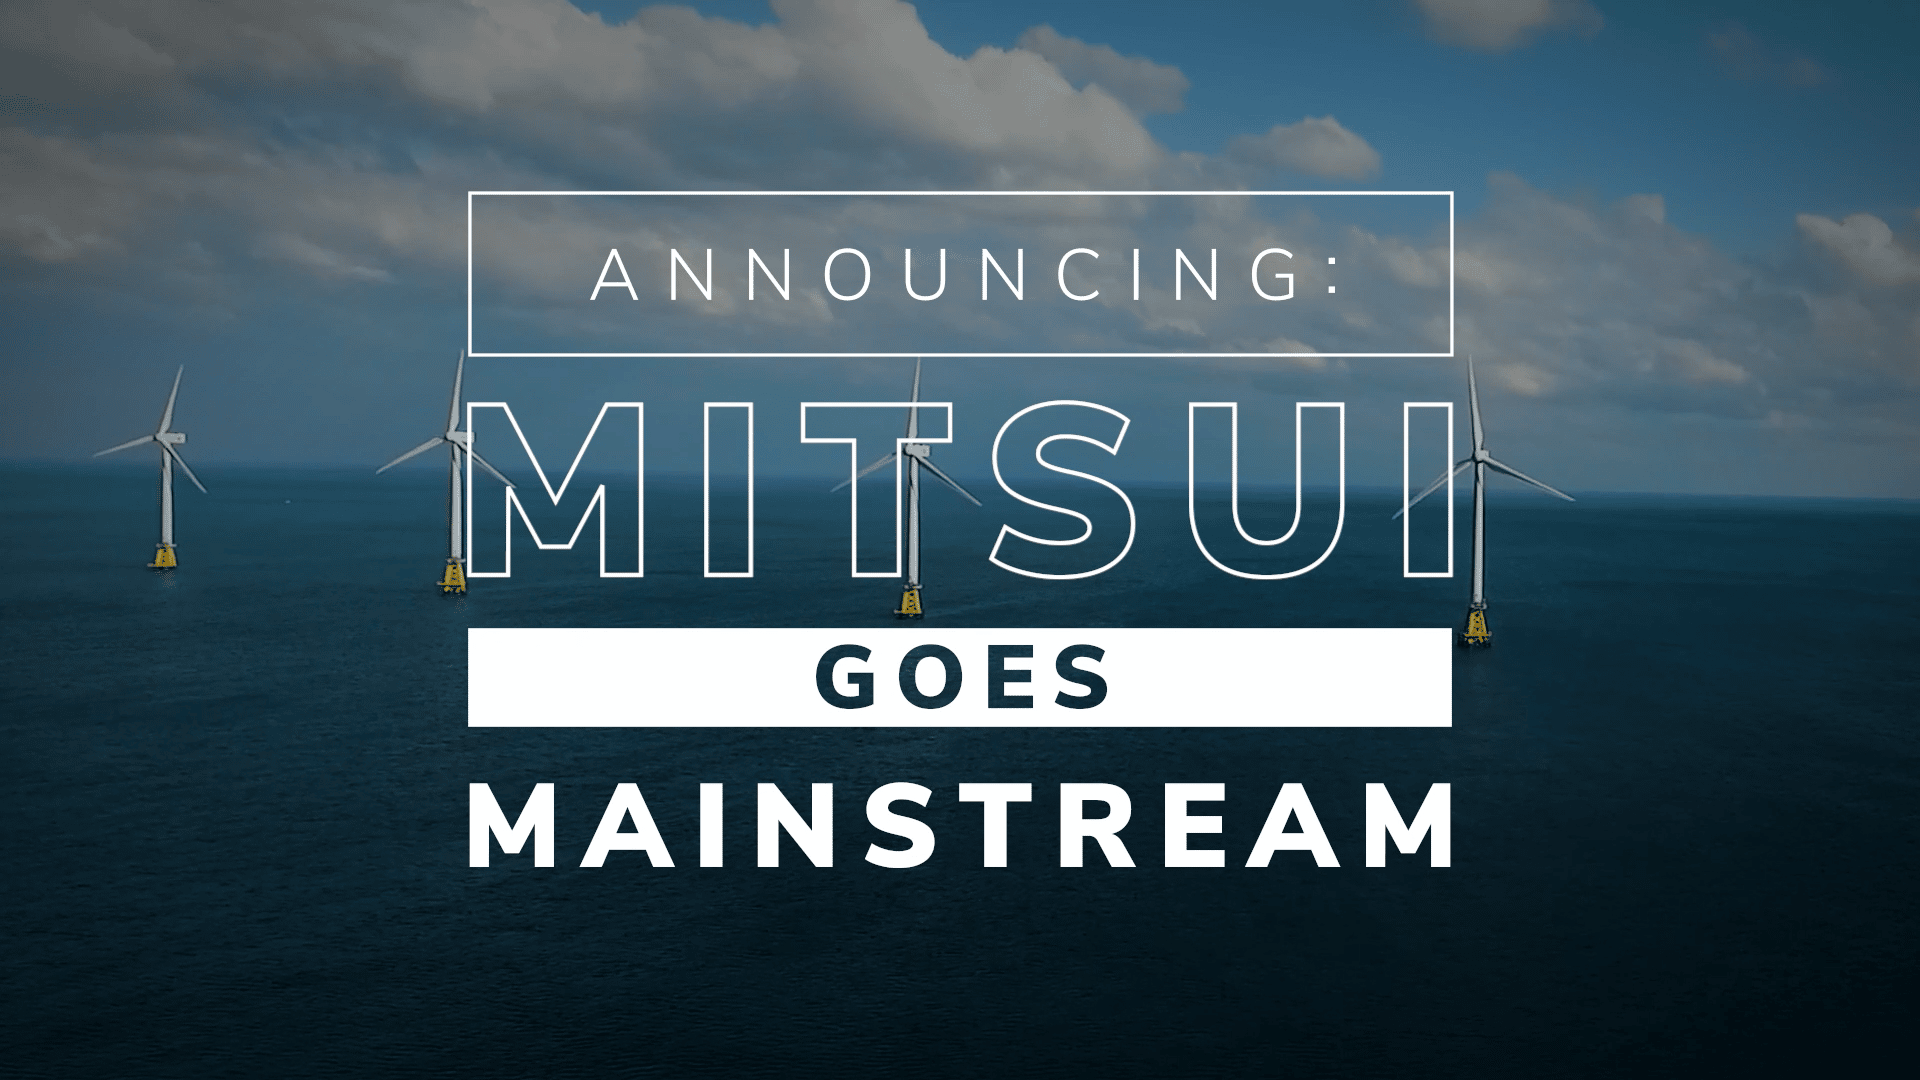 'Announcing Mitsui goes Mainstream' video thumbnail